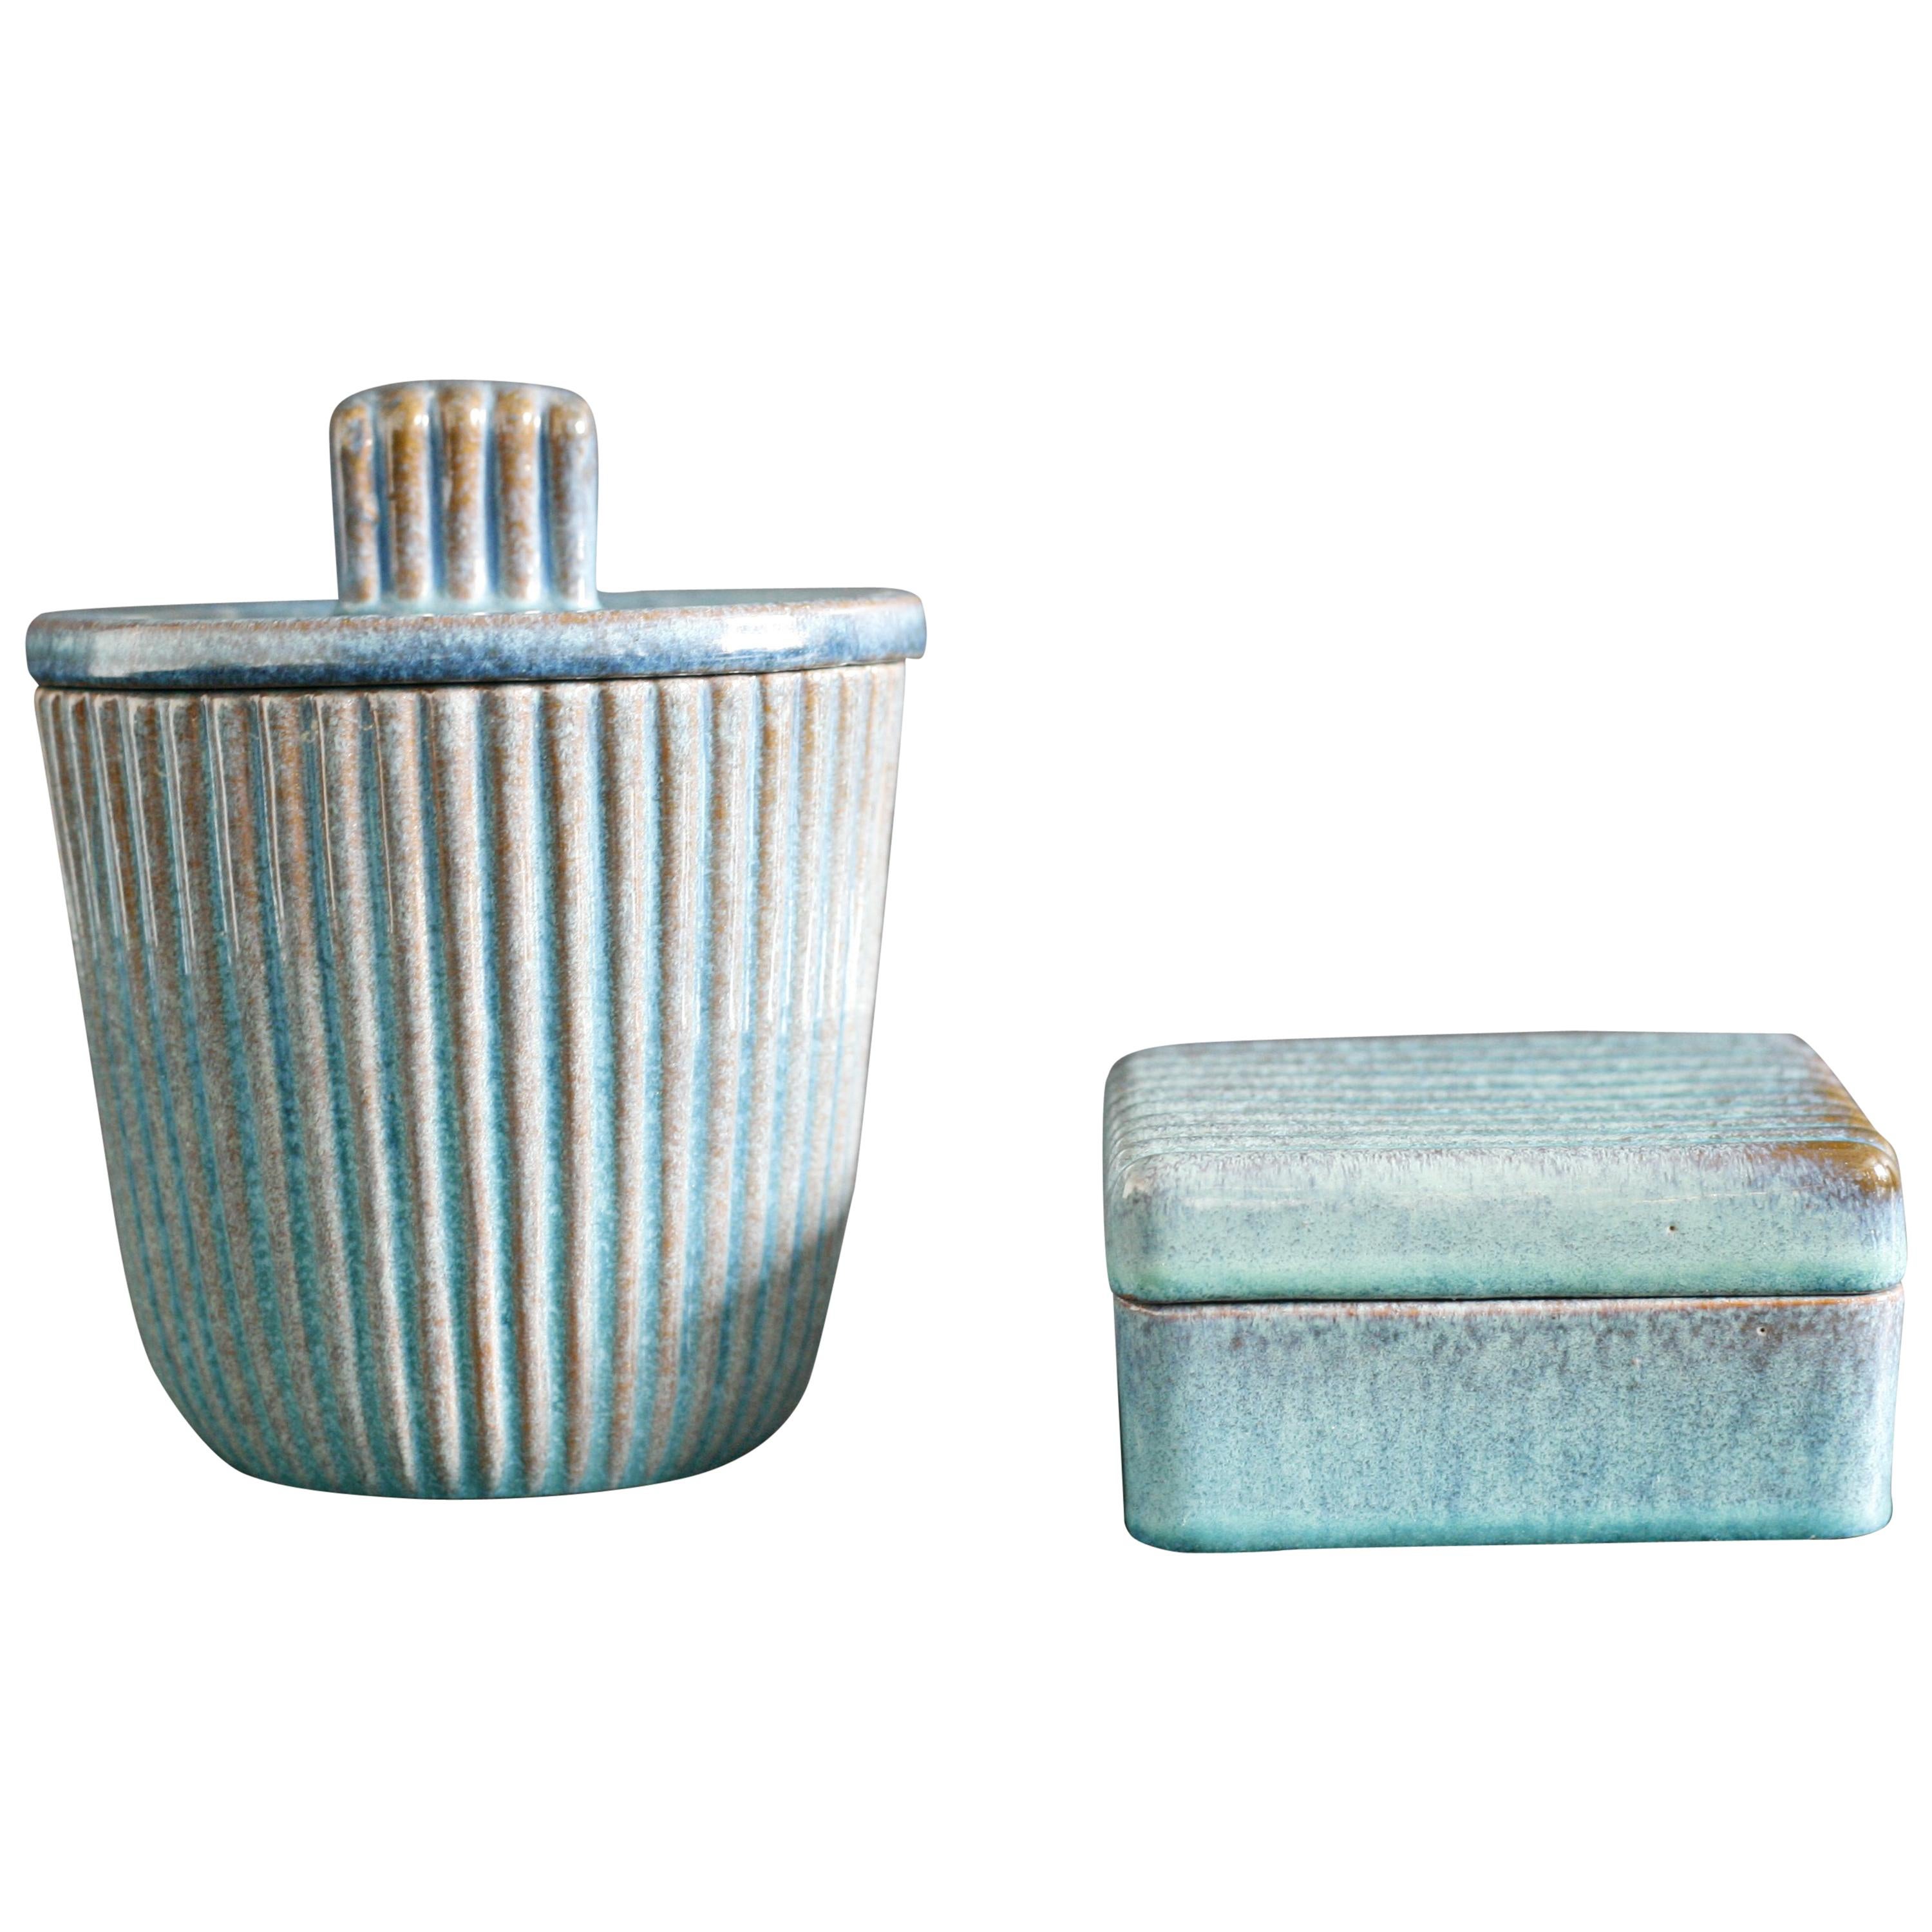 Ekeby ceramics, Sweden, 1960s set consisting of an urn and a jar in a blue/turquoise dual glaze layer that shows the underlying ceramic that shines through on the edges designed by Vicke lindstrand this pair is in mint condition.

 